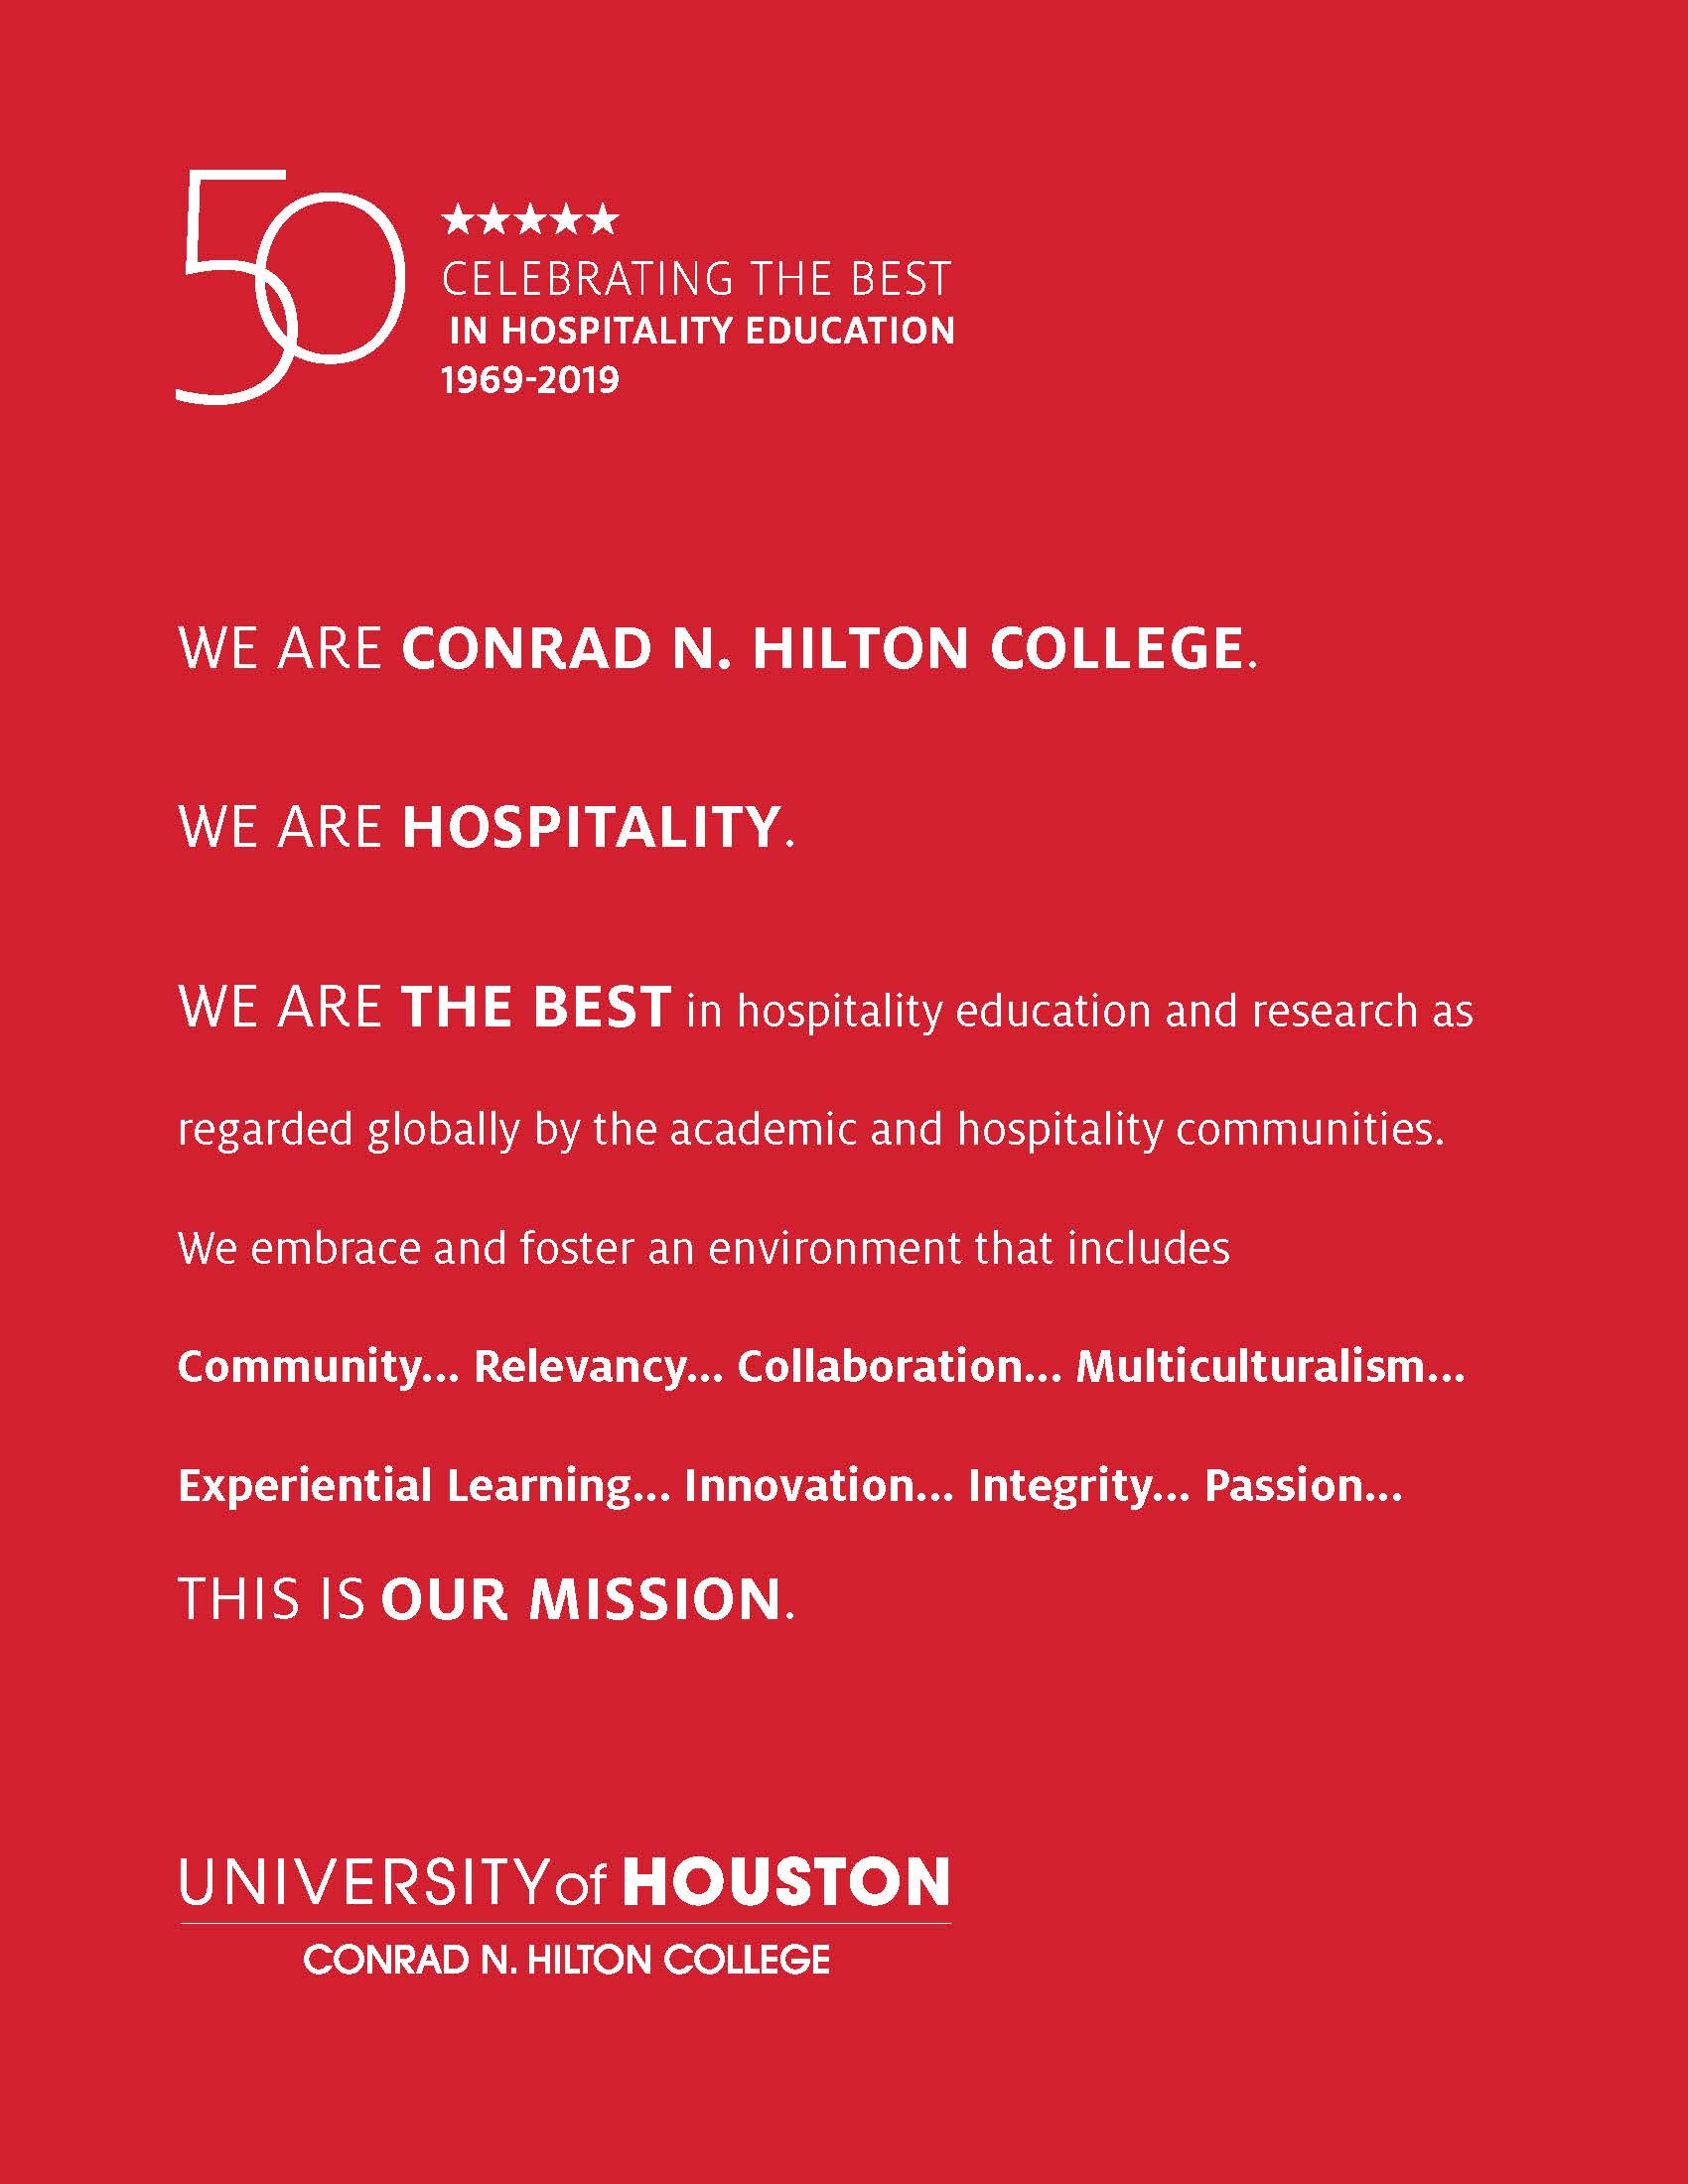 WE ARE CONRAD N. HILTON COLLEGE. WE ARE HOSPITALITY. WE ARE THE BEST in hospitality education and research as regarded globally by the academic and hospitality communities. We embrace and foster an environment that includes Community... Relevancy... Collaboration... Multiculturalism... Experiential Learning... Innovation... Integrity... Passion... THIS IS OUR MISSION.